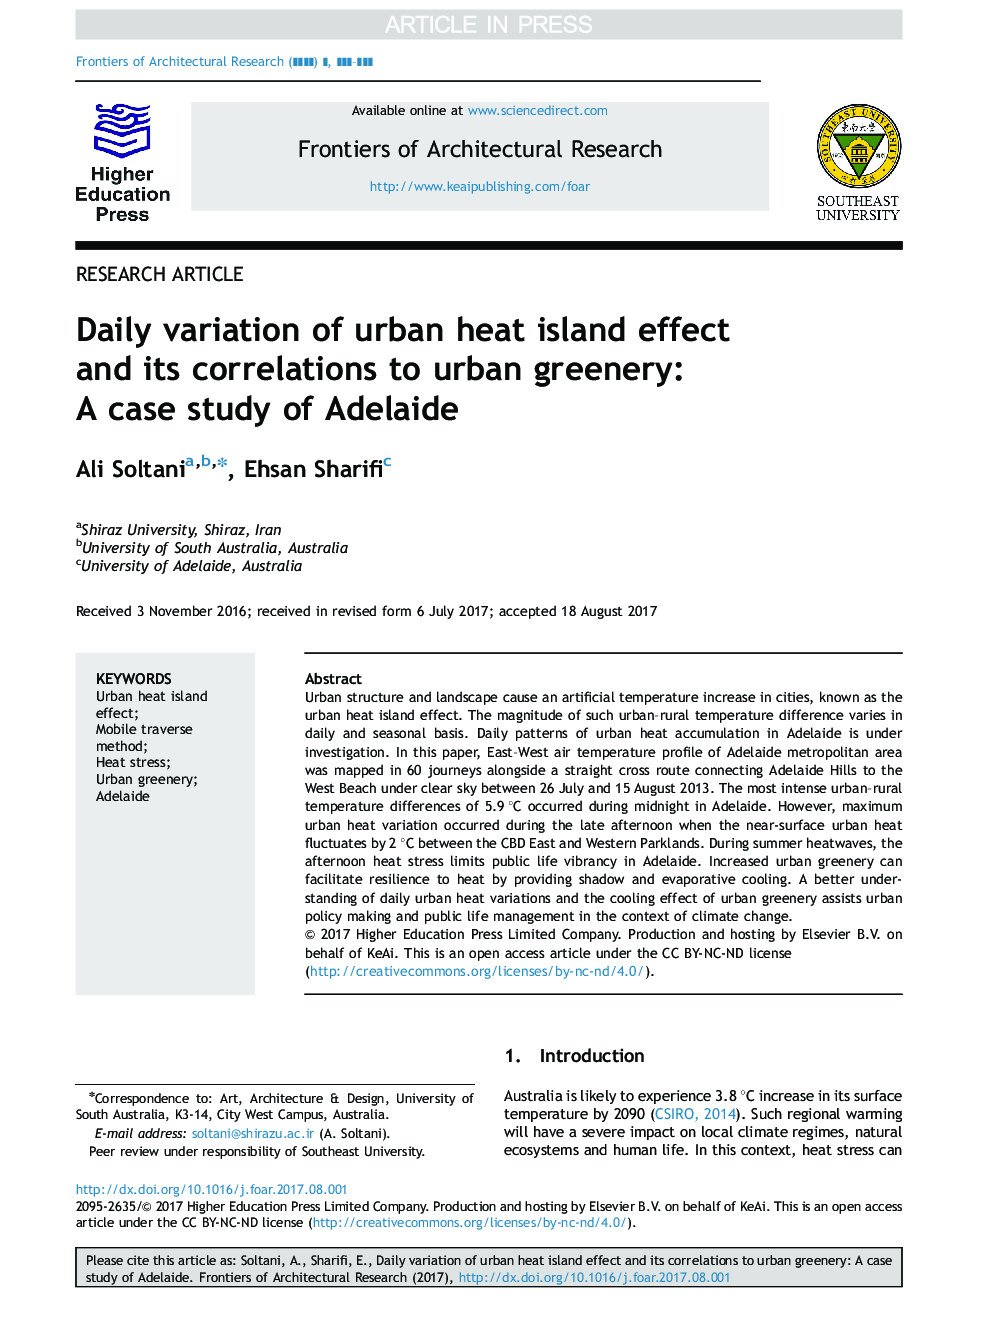 Daily variation of urban heat island effect and its correlations to urban greenery: A case study of Adelaide